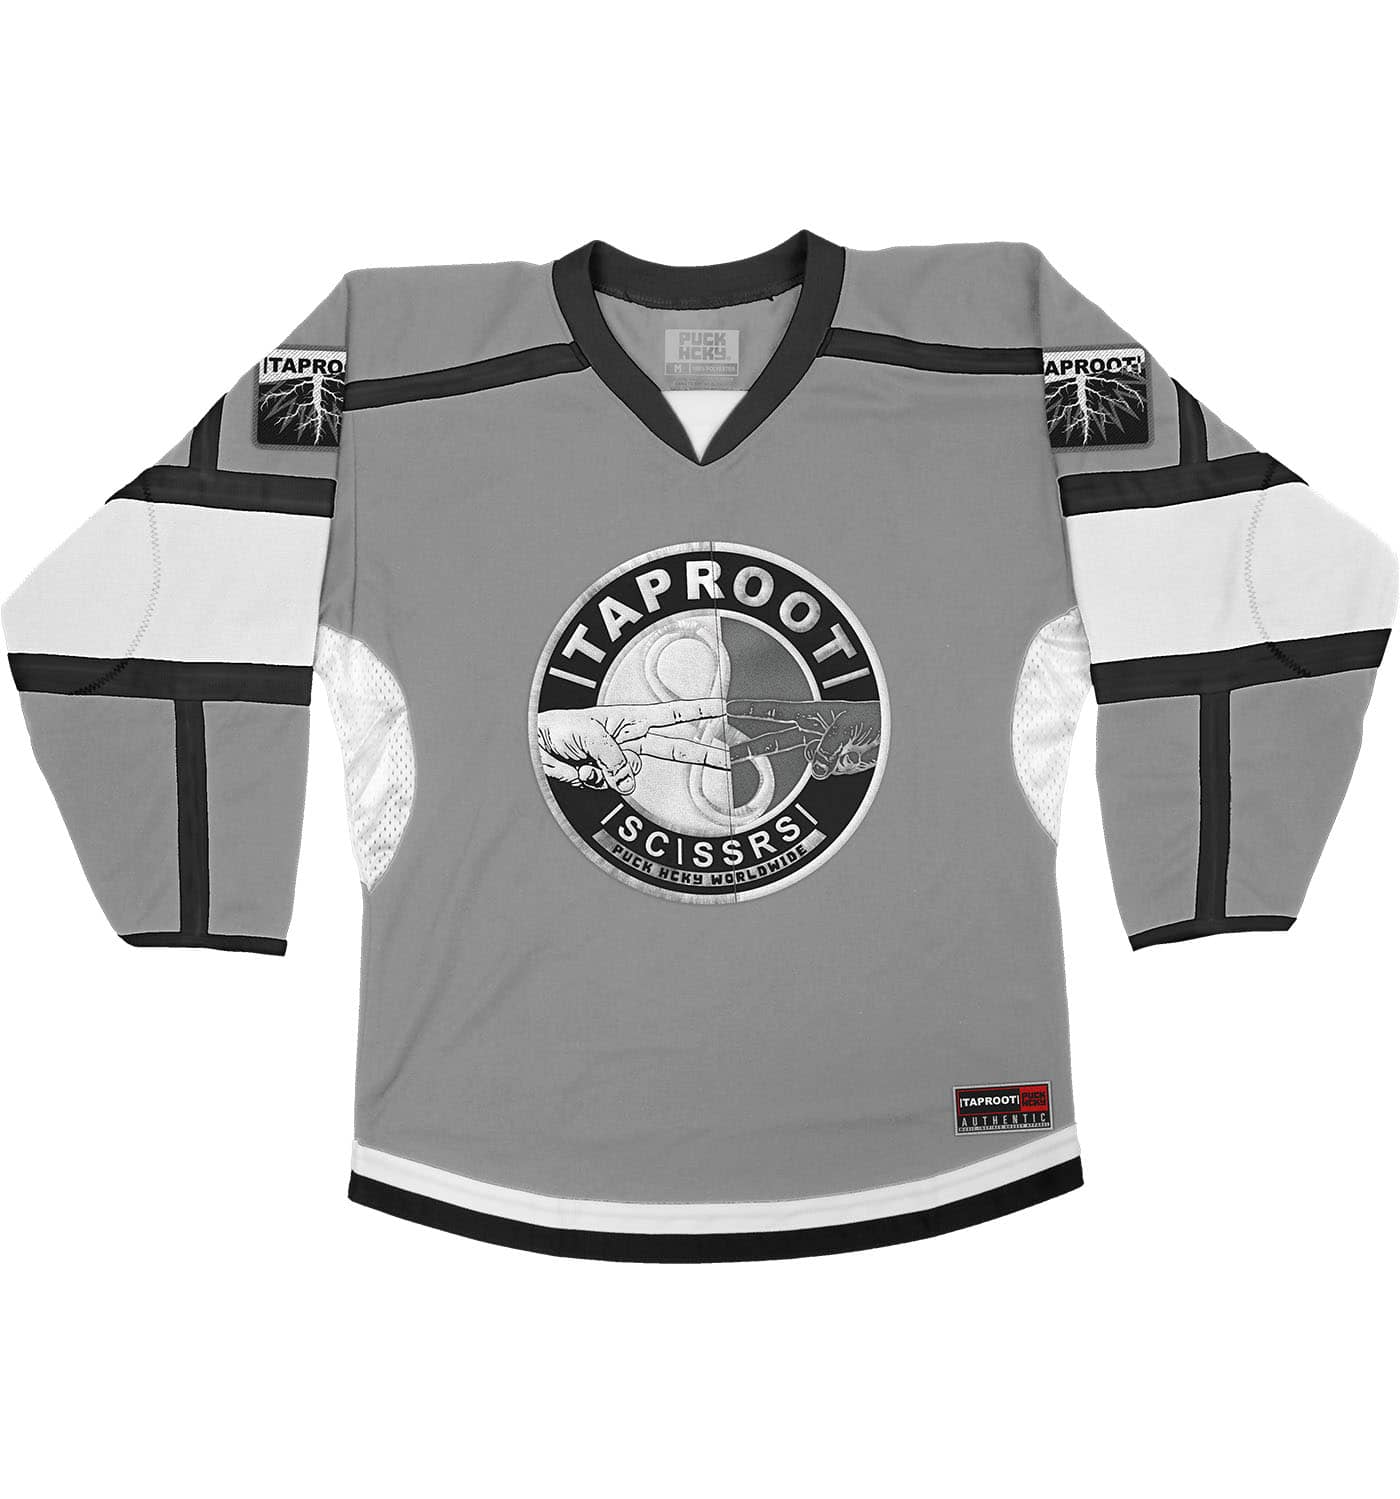 Taproot 'SCSSRS' Deluxe Hockey Jersey (Grey) Grey/Black/White / 3XL